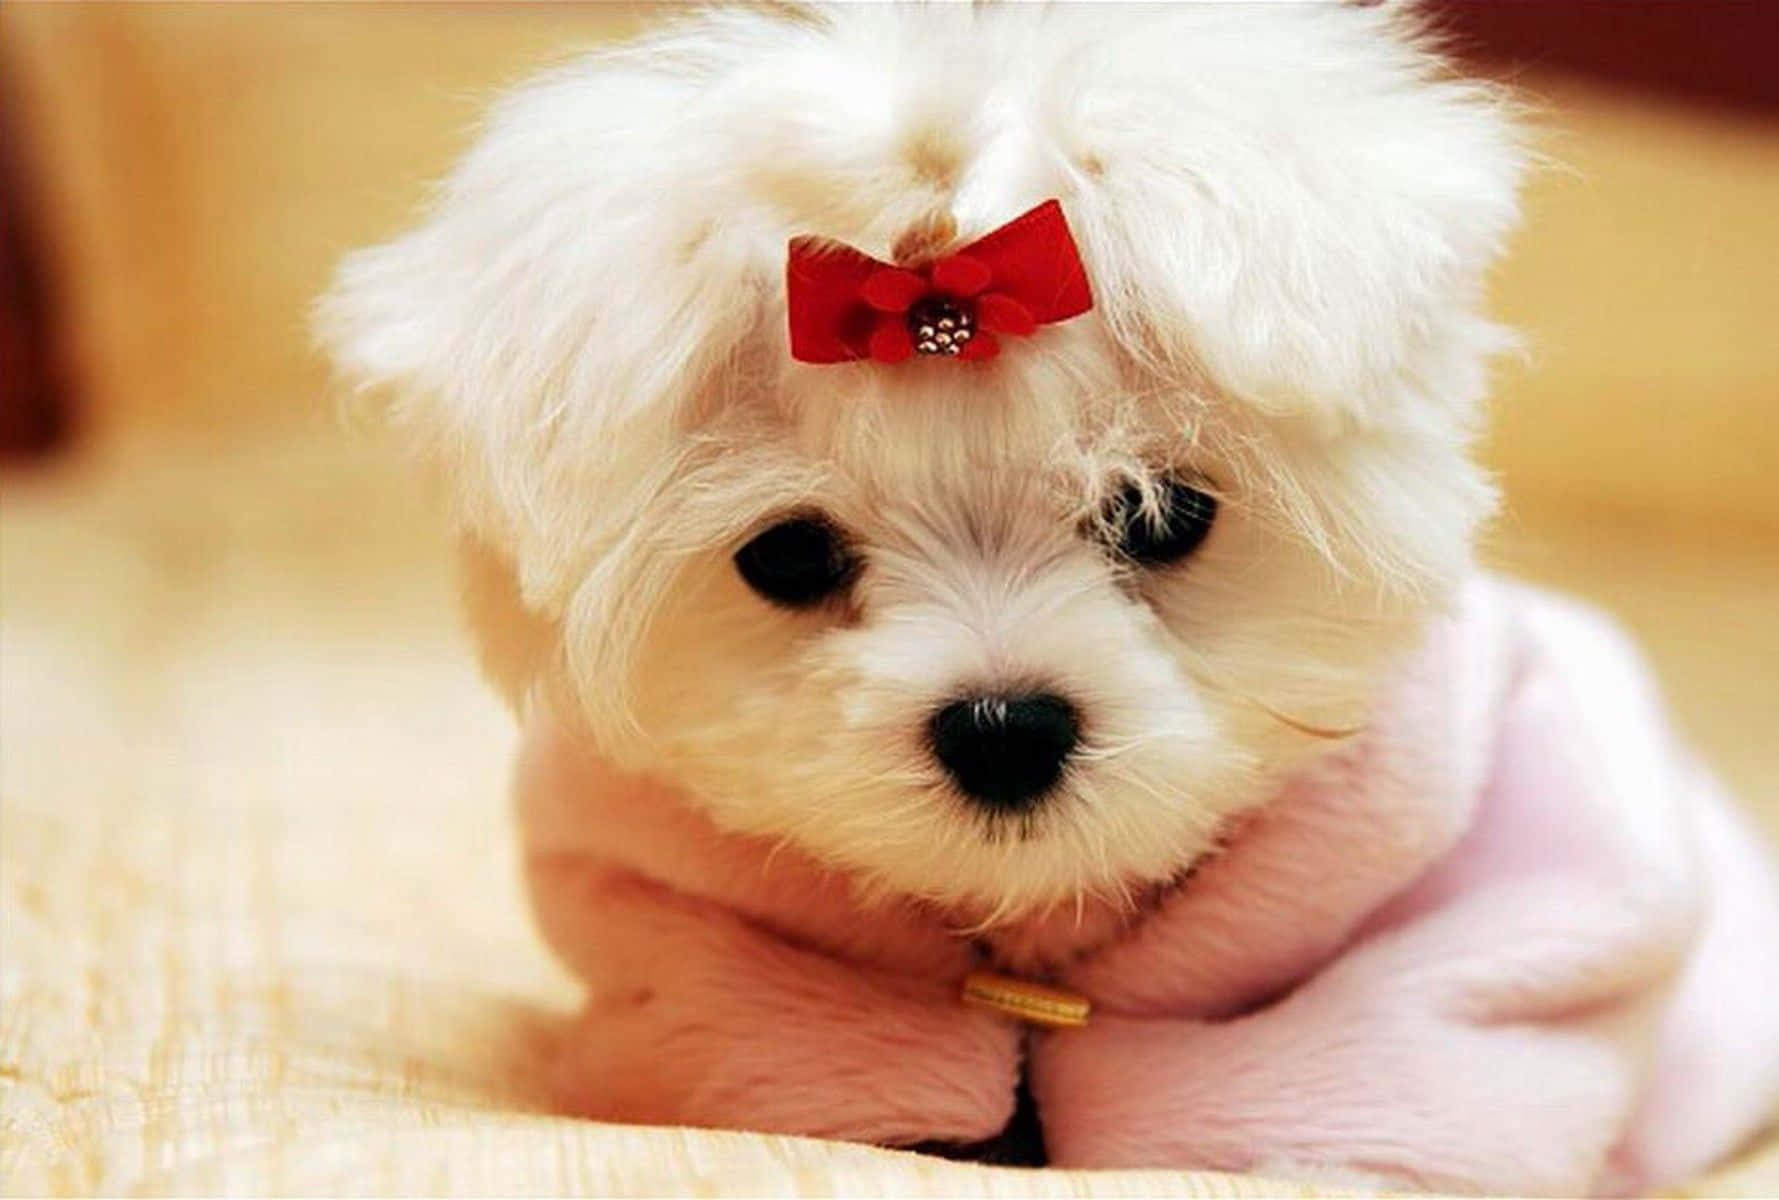 Cute White Dog With A Red Bow